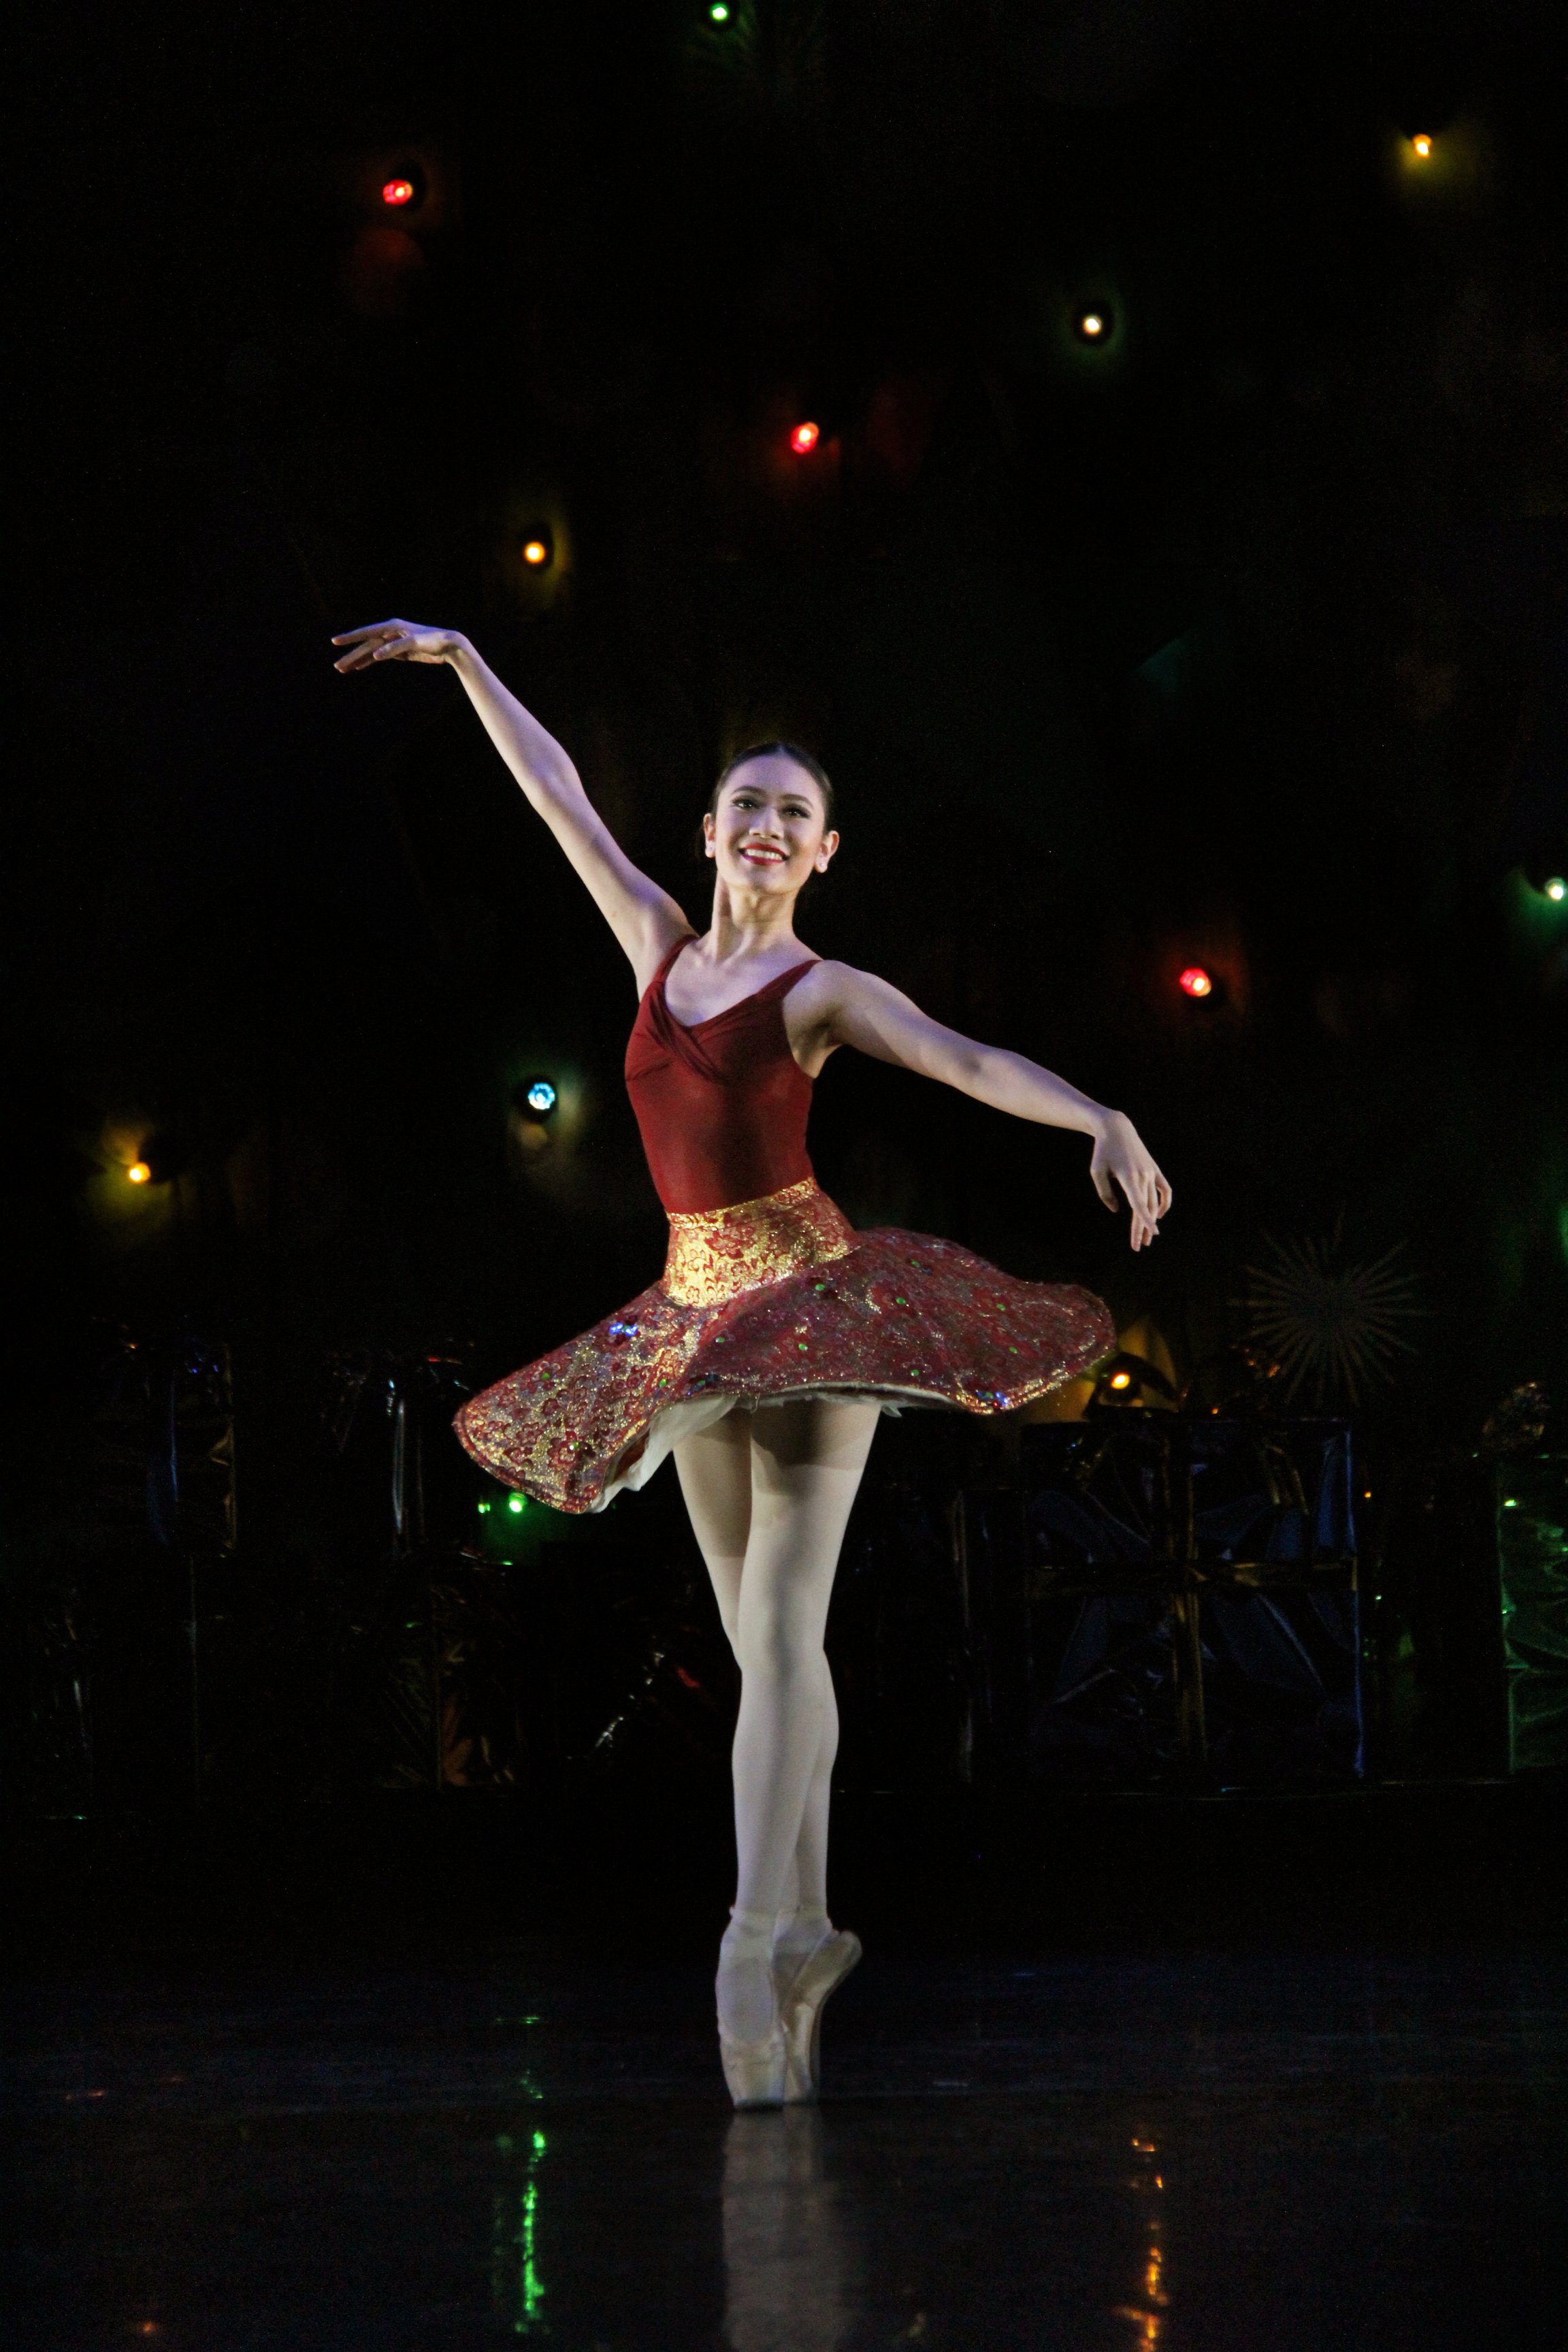    For the Christmas production  Nutkraker  (2014), Abigail Oliveiro channels the spirit of the season in a maroon tutu with a crisp skirt that glints with gold embellishments.  Nutkraker  combined excerpts of the holiday ballet classic,  Nutcracker 